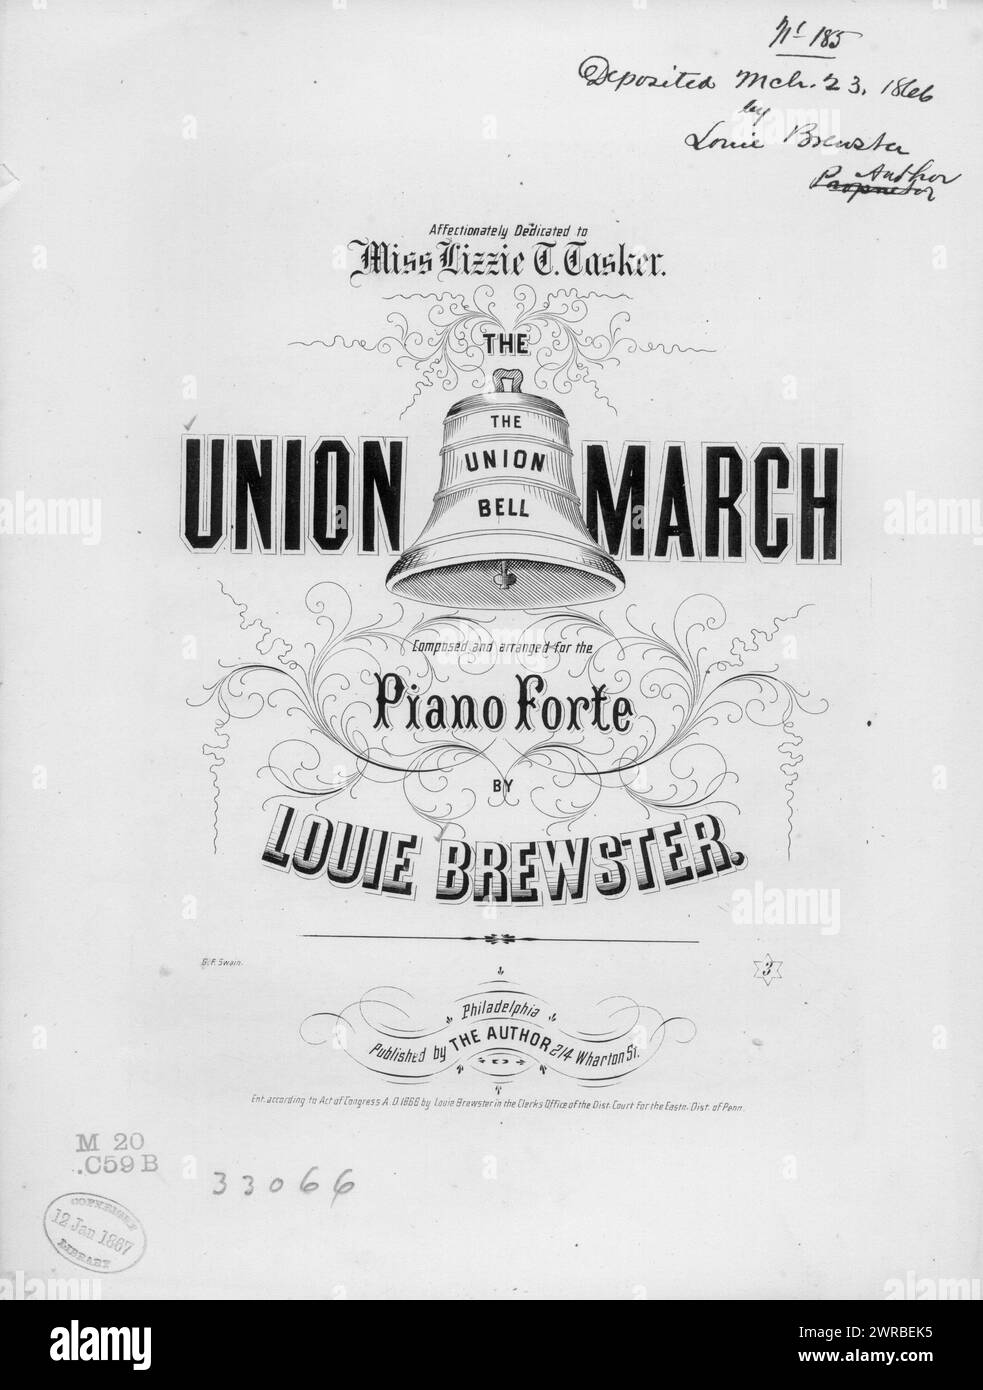 The Union bell march, Brewster, Louie (composer), The Author, Philadelphia, 1866., United States, History, Civil War, 1861-1865, Songs and music Stock Photo